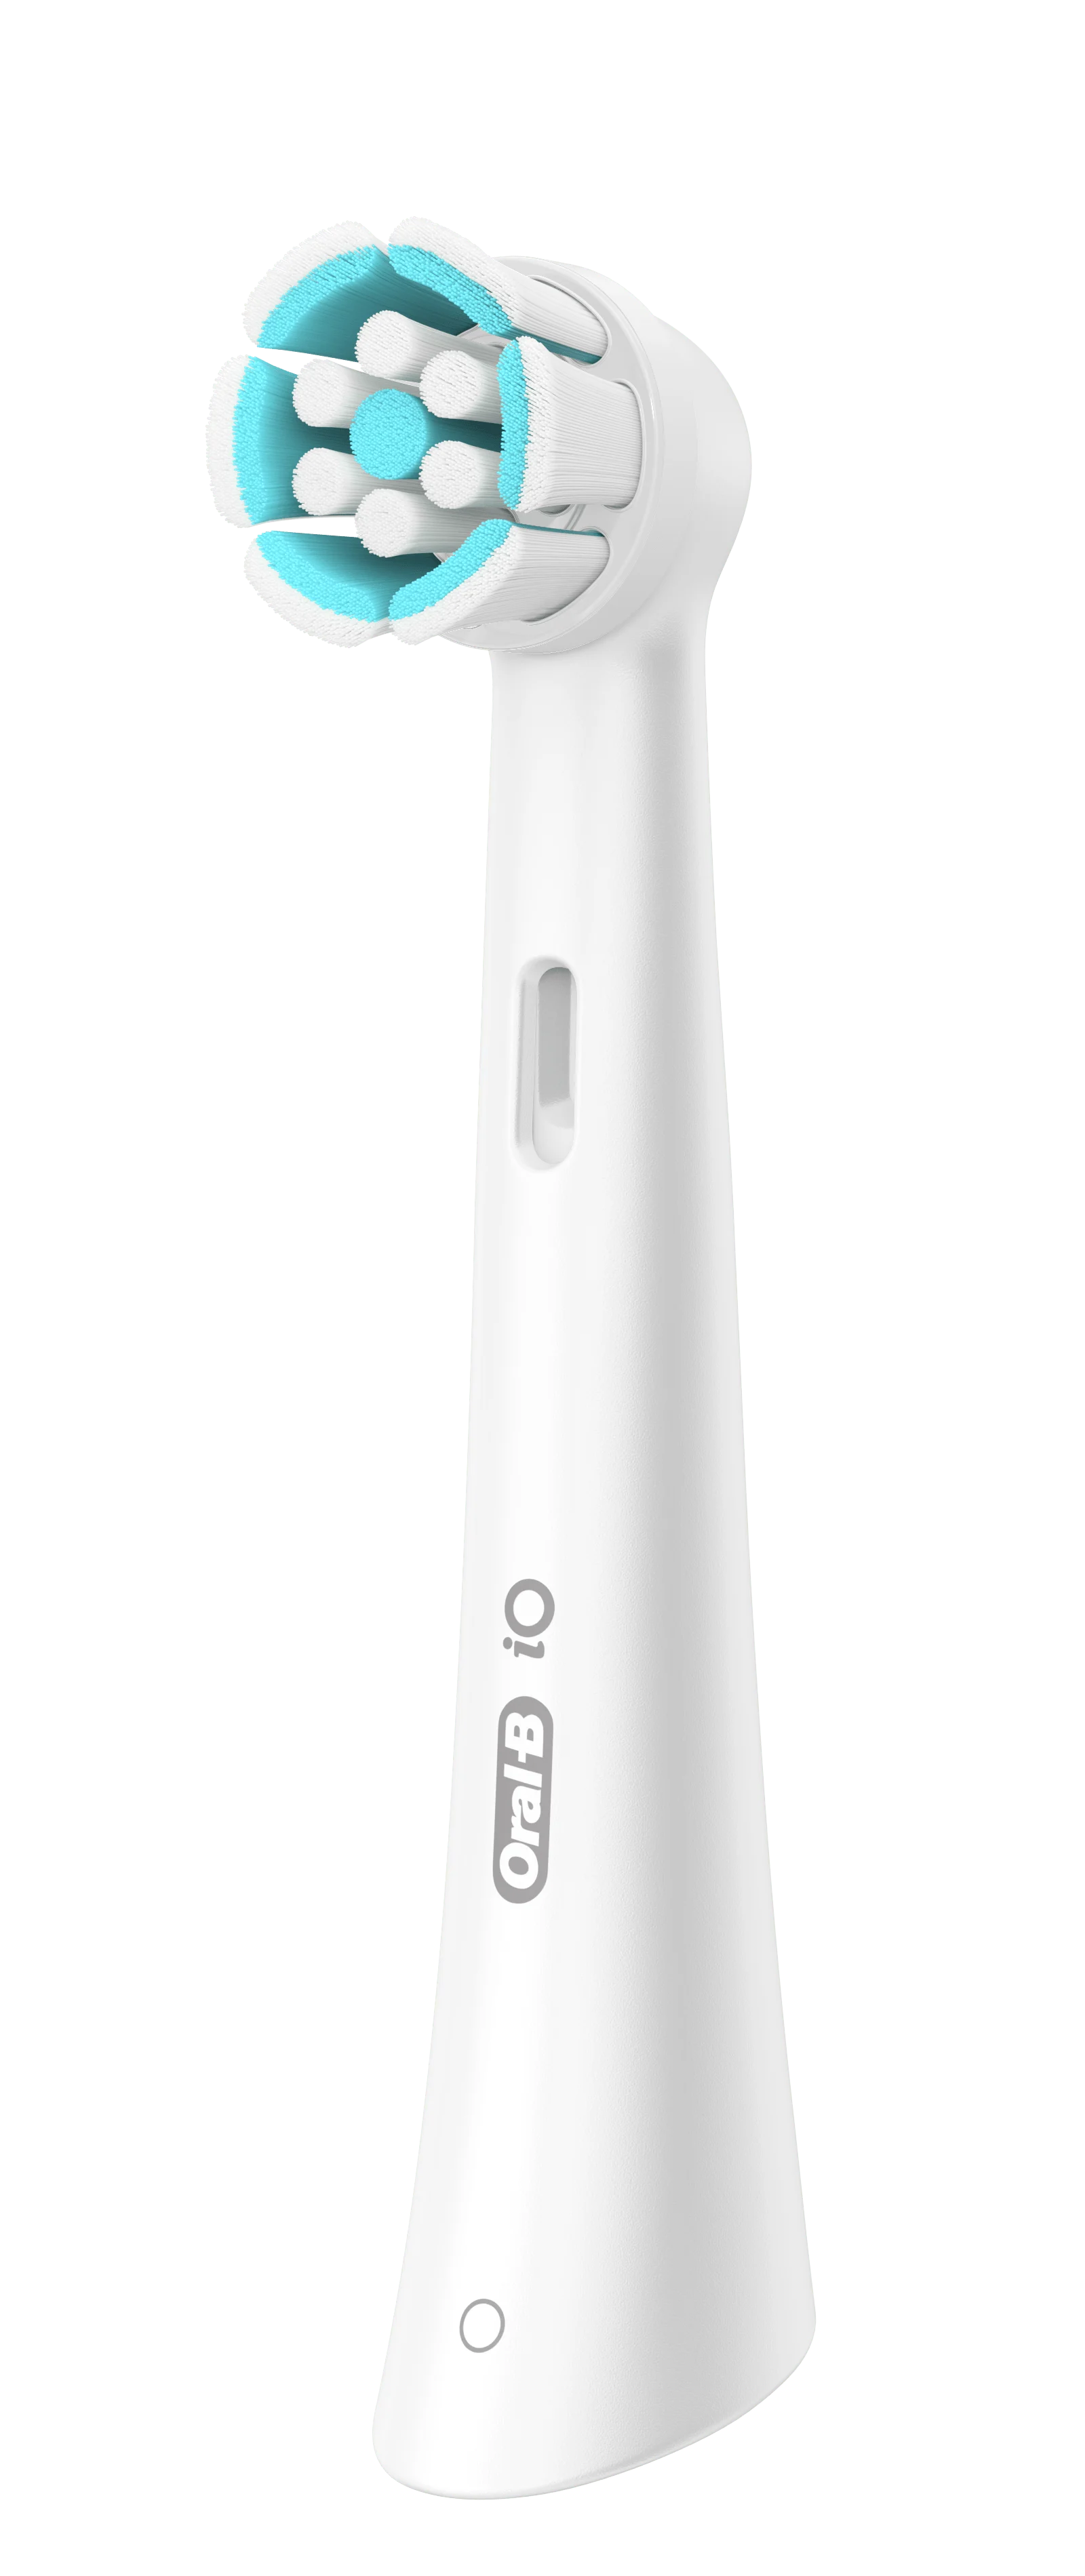 Oral-b iO gentle care 3rd frame